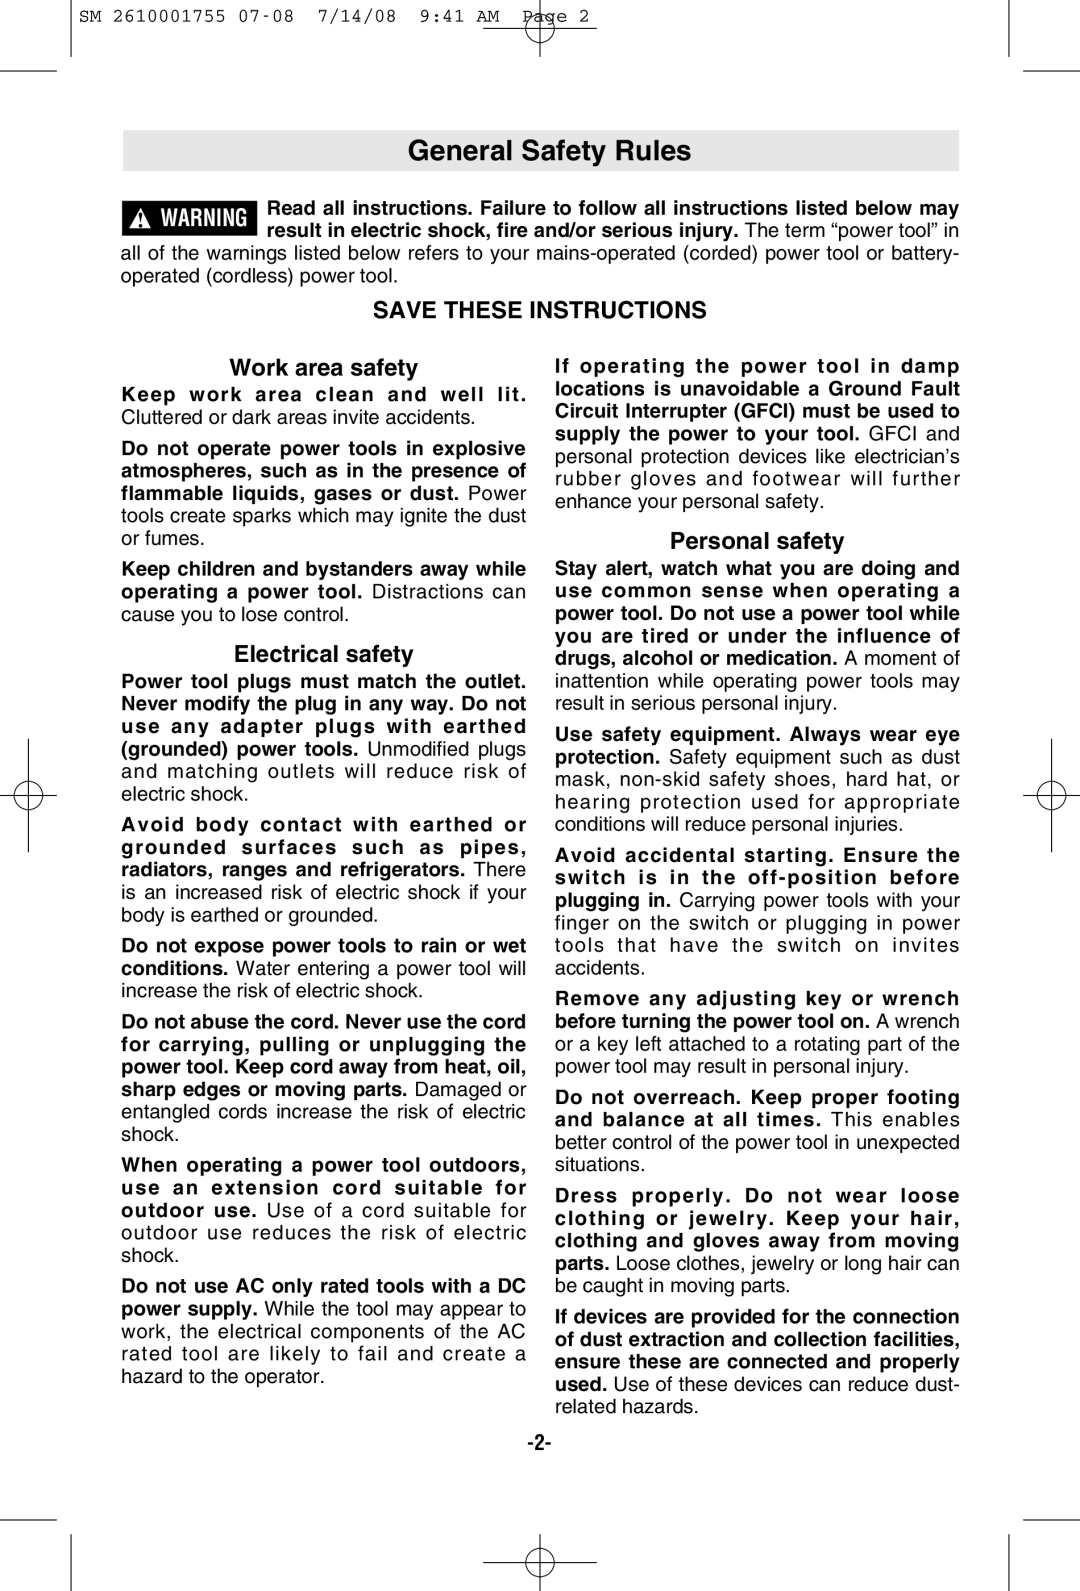 Skil 9215 manual General Safety Rules, Save These Instructions, Work area safety, Electrical safety, Personal safety 